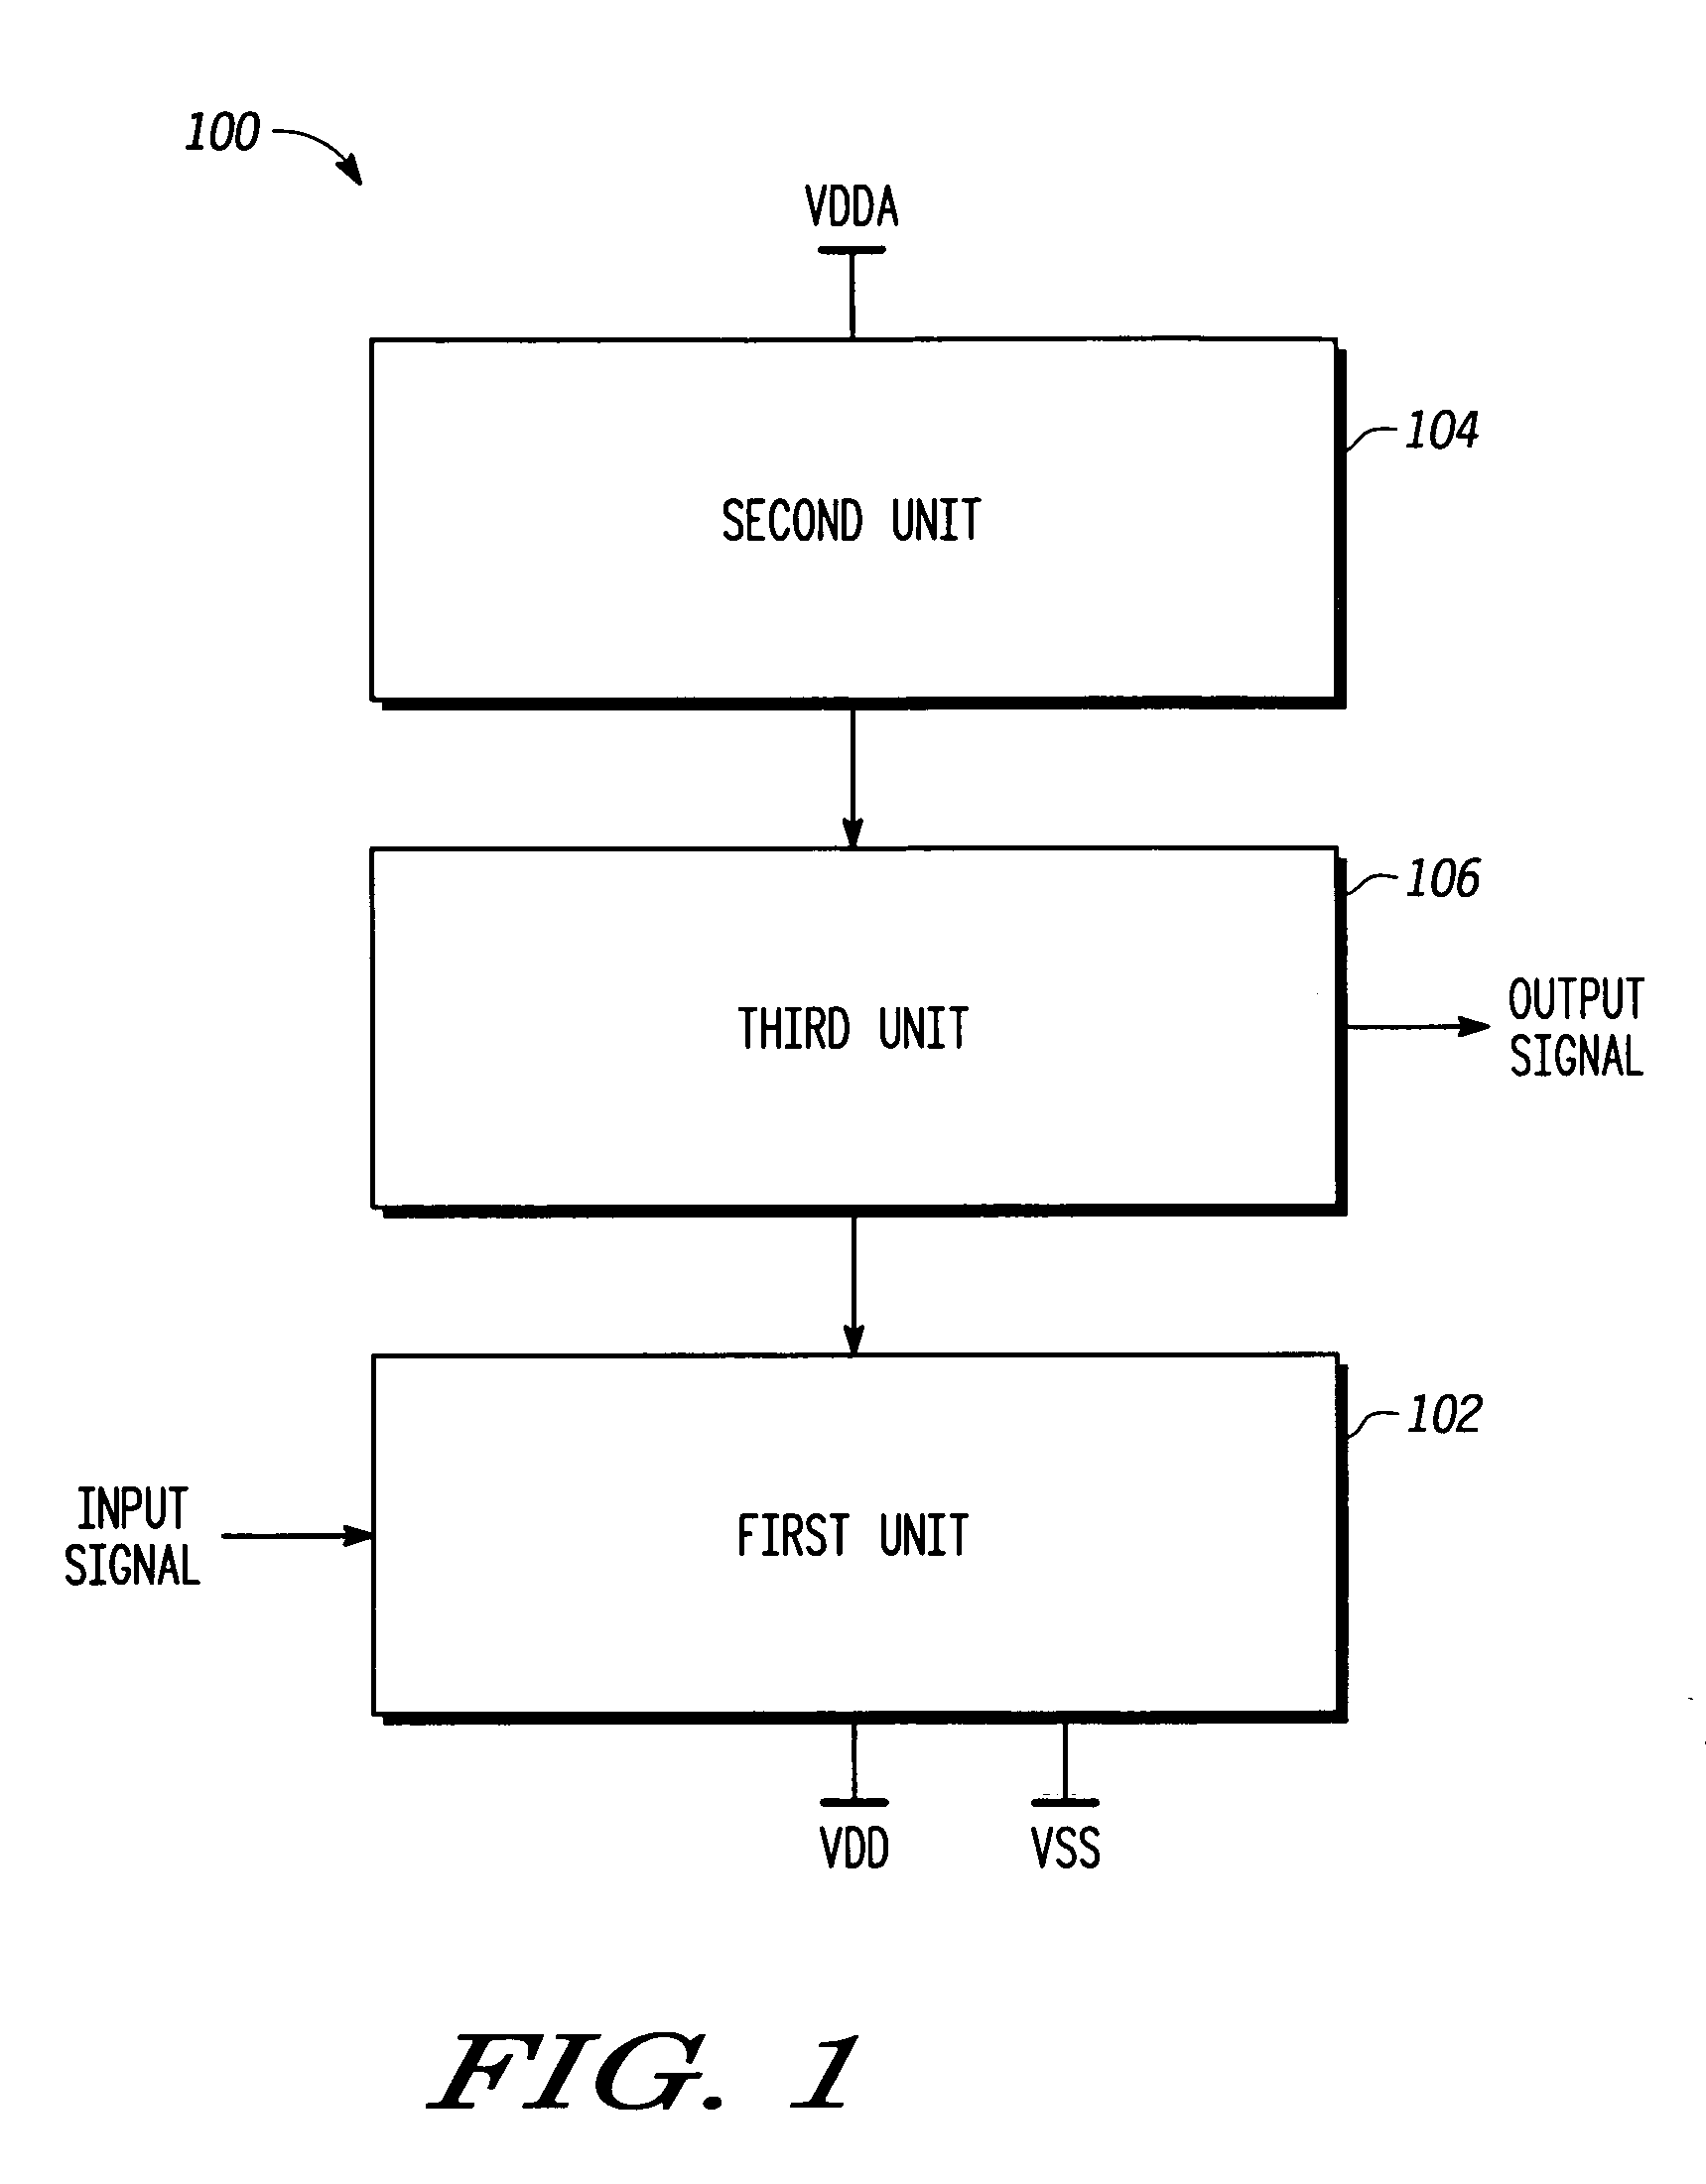 High voltage level converter using low voltage devices